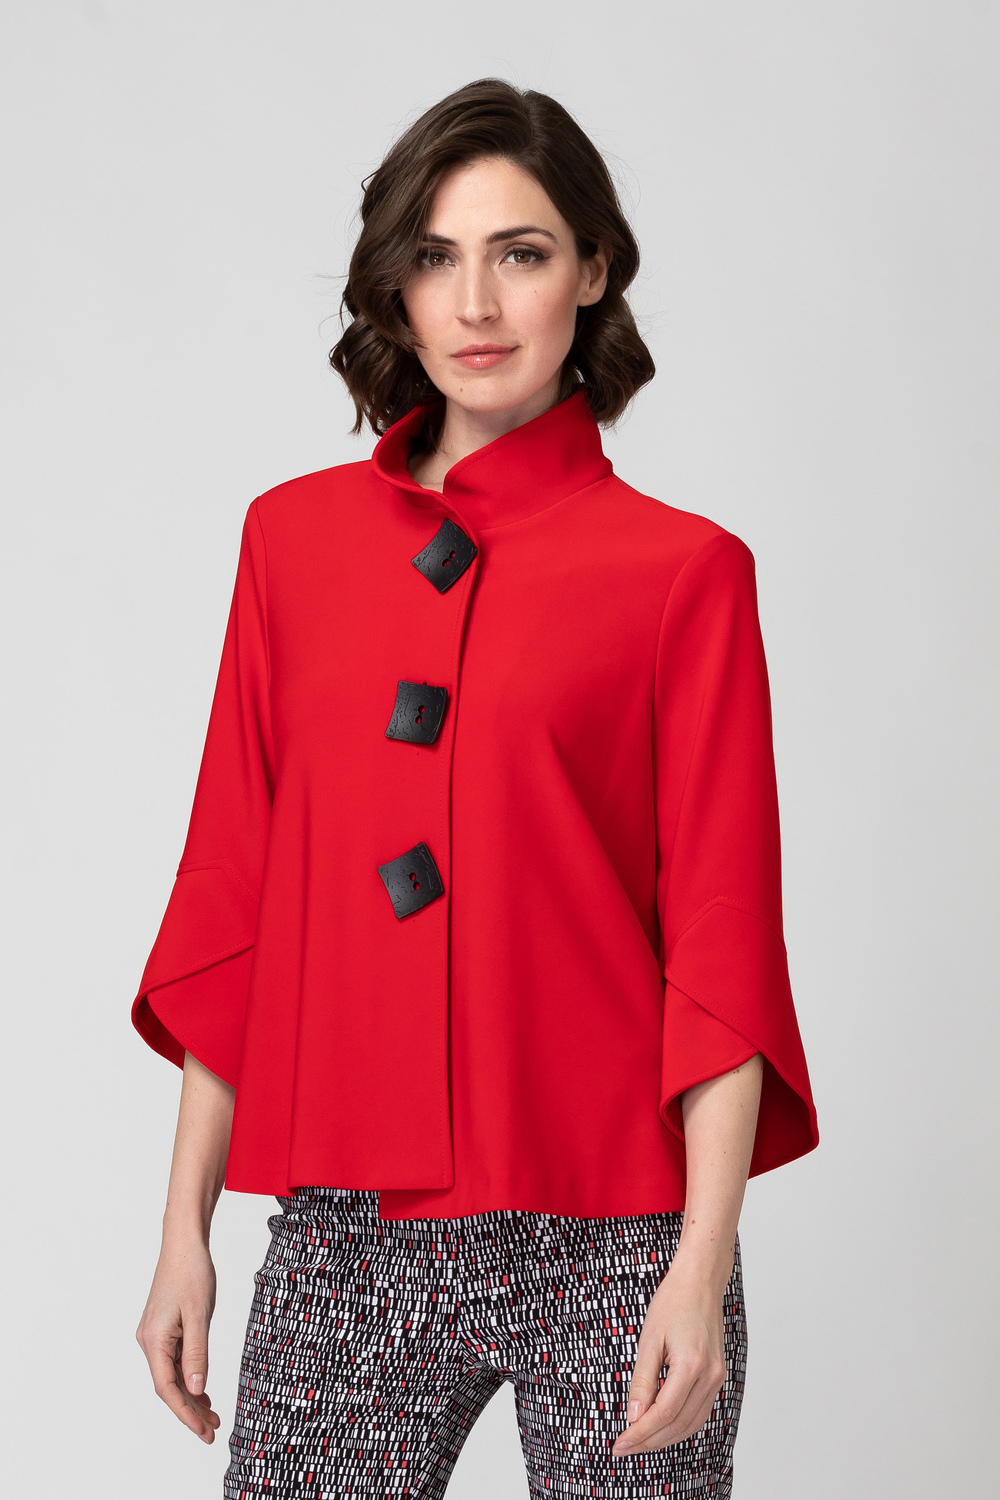 Loose-Fit Blazer Style 193198. Lipstick Red 173